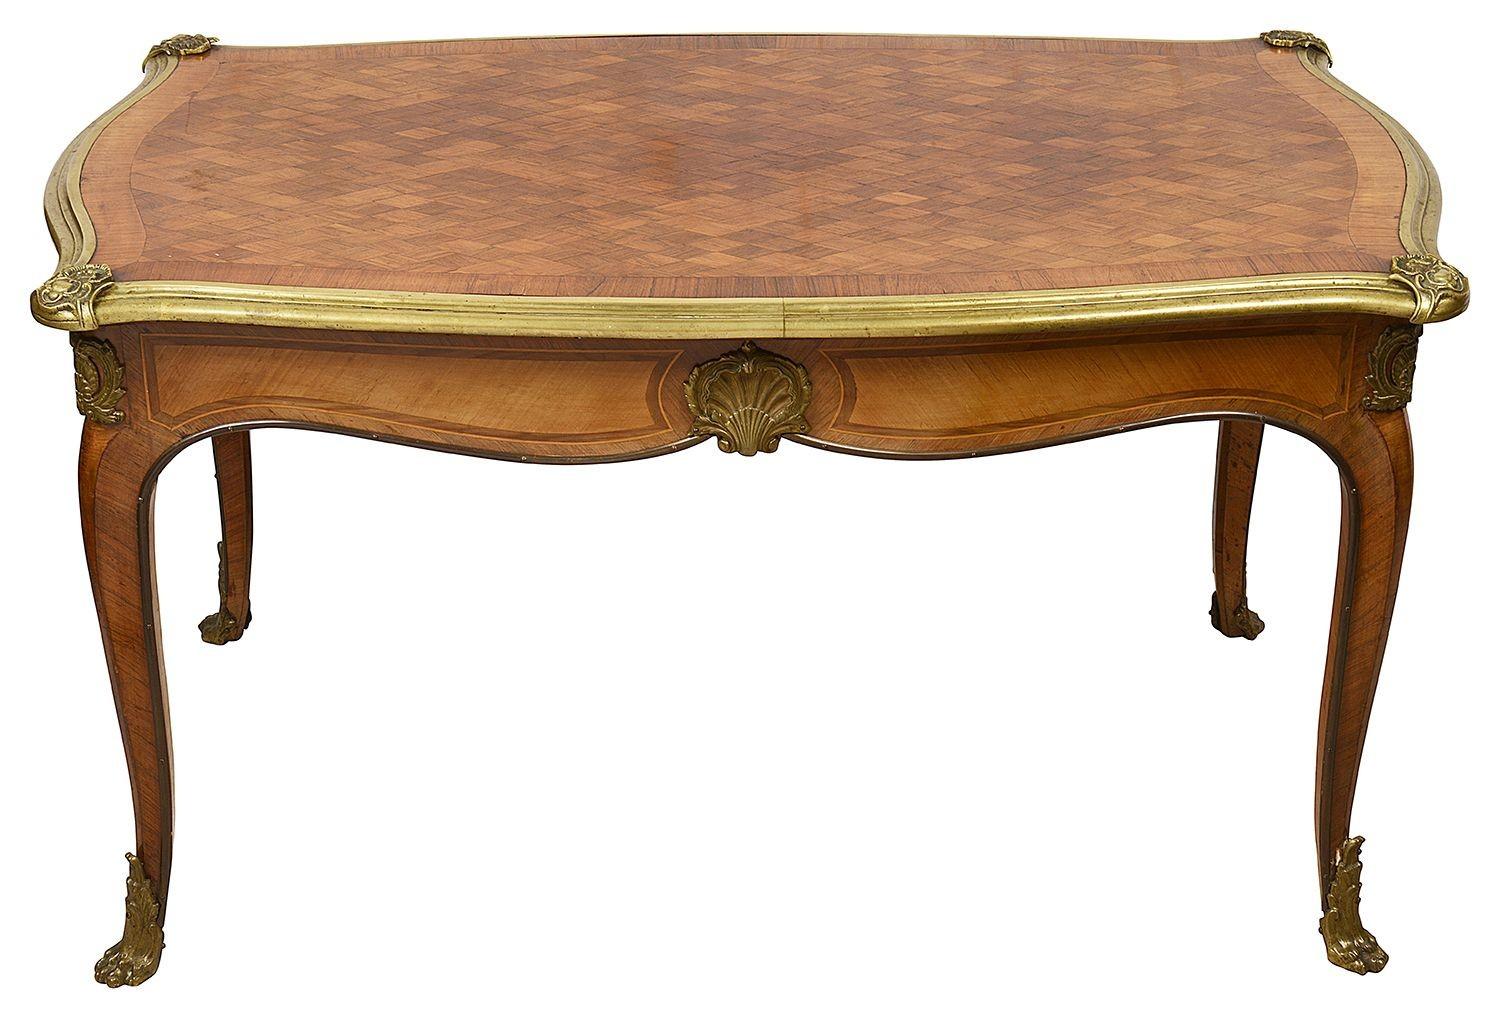 A good quality French late 19th century parquetry inlaid Kingwood side / coffee table, having gilded ormolu moldings, raised on elegant cabriole legs.